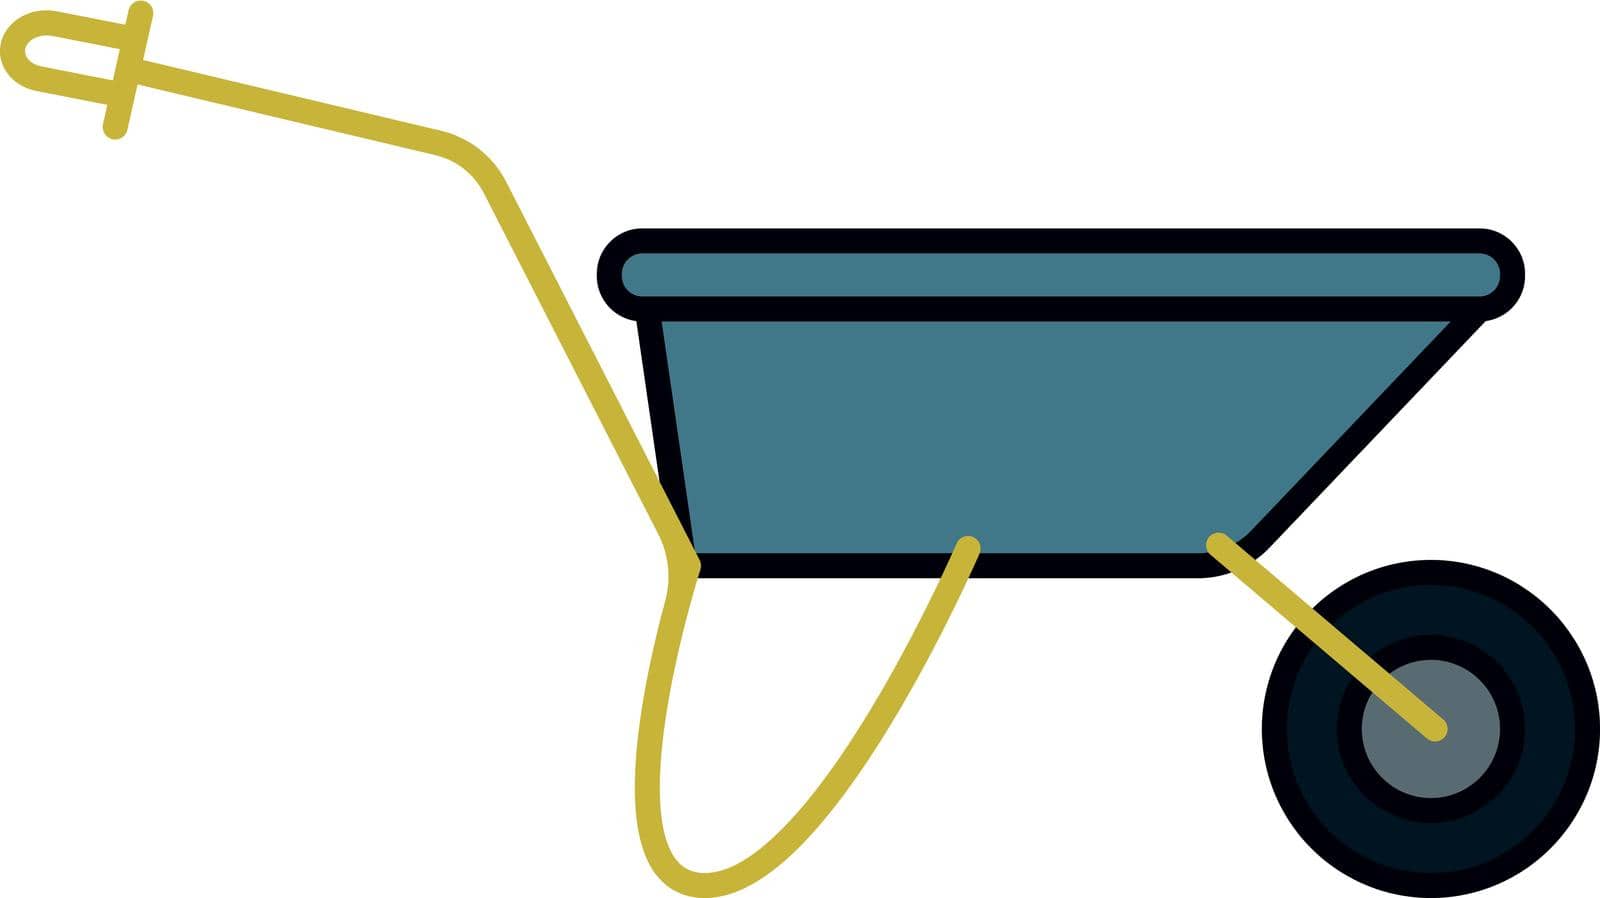 This vector image shows a wheelbarrow in a filled outline icon design. It is isolated on a white background.